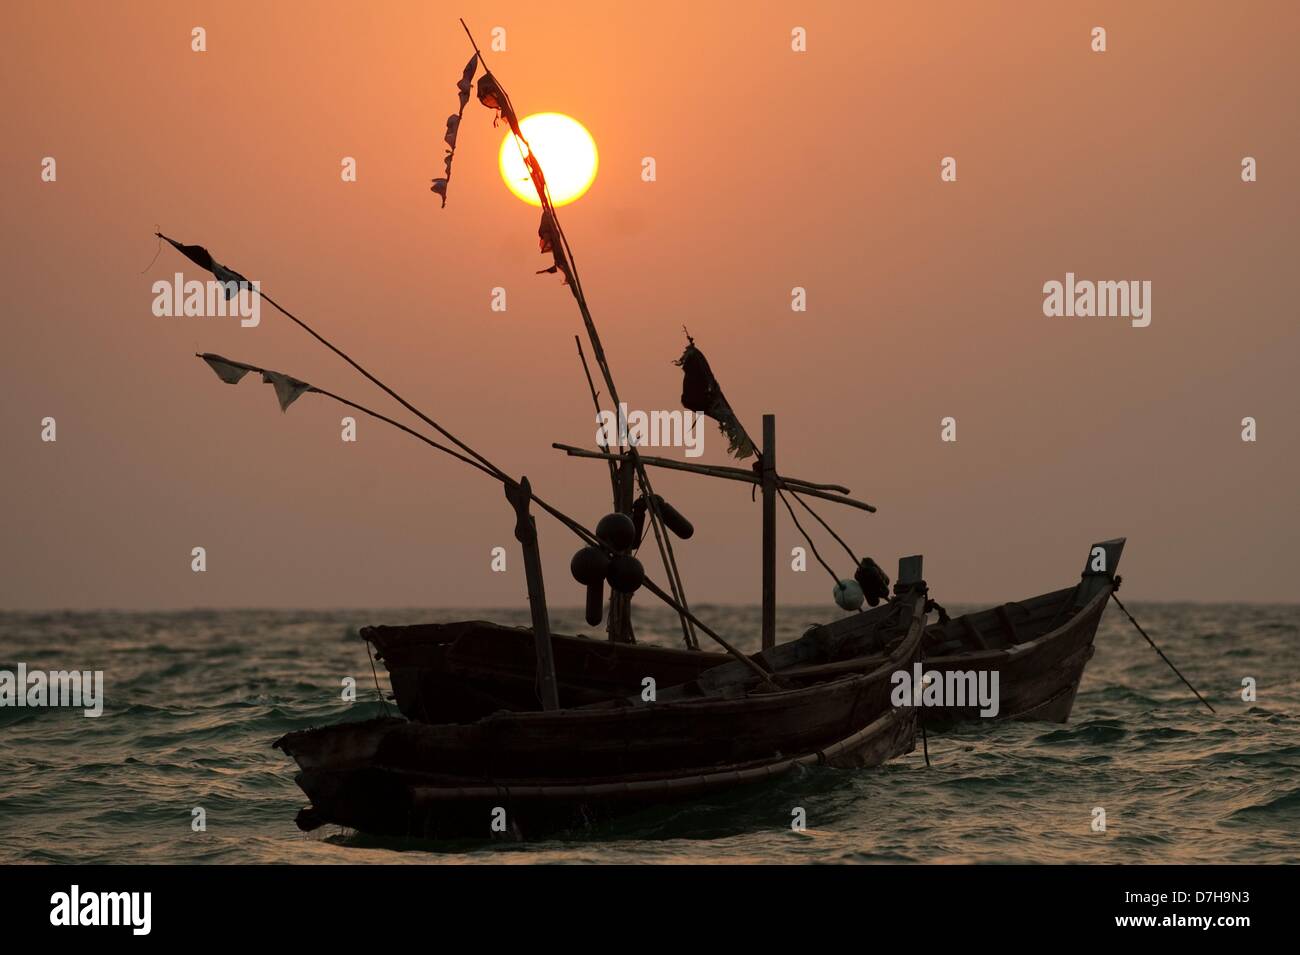 Two fishing boats are pictured during sunset at Ngapali Beach, Myanmar, 08 April 2013. Photo: Sebastian Kahnert Stock Photo